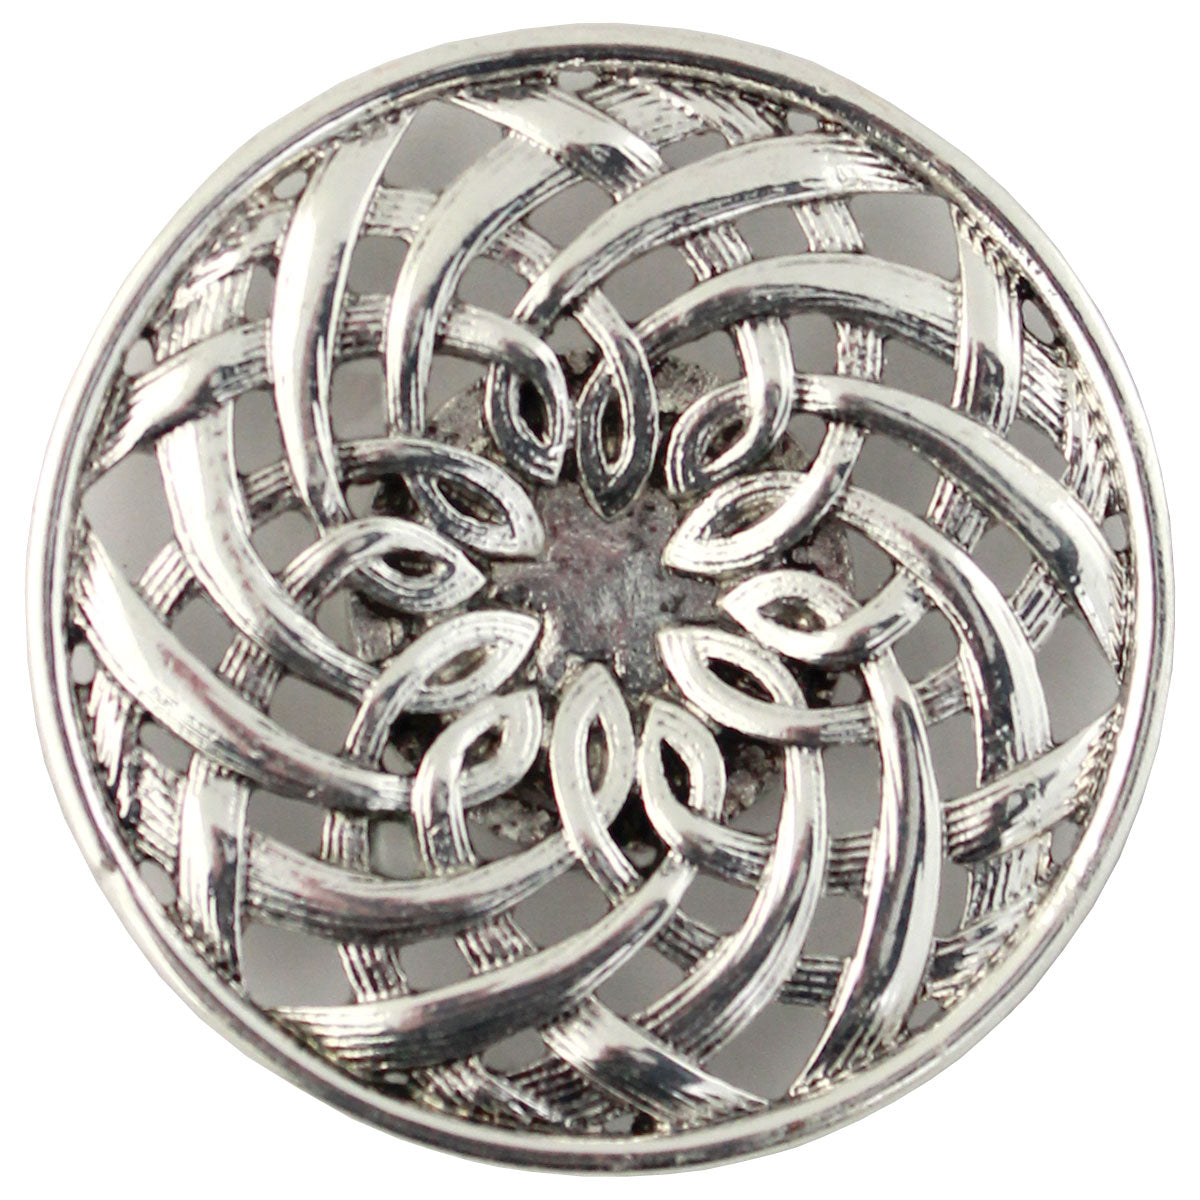 Celtic basket weave round. Magnetic Brooch for Scarves Artistic Sculptural shapes add a personality to absolutely anything you wish to put your stamp on! The Super Strong Magnet is enough for a jacket lapel! Use to hold a sarong or cardigan together.  Great to adorn a hat or to hold a scarf in place with Fabric Safe Magnet.